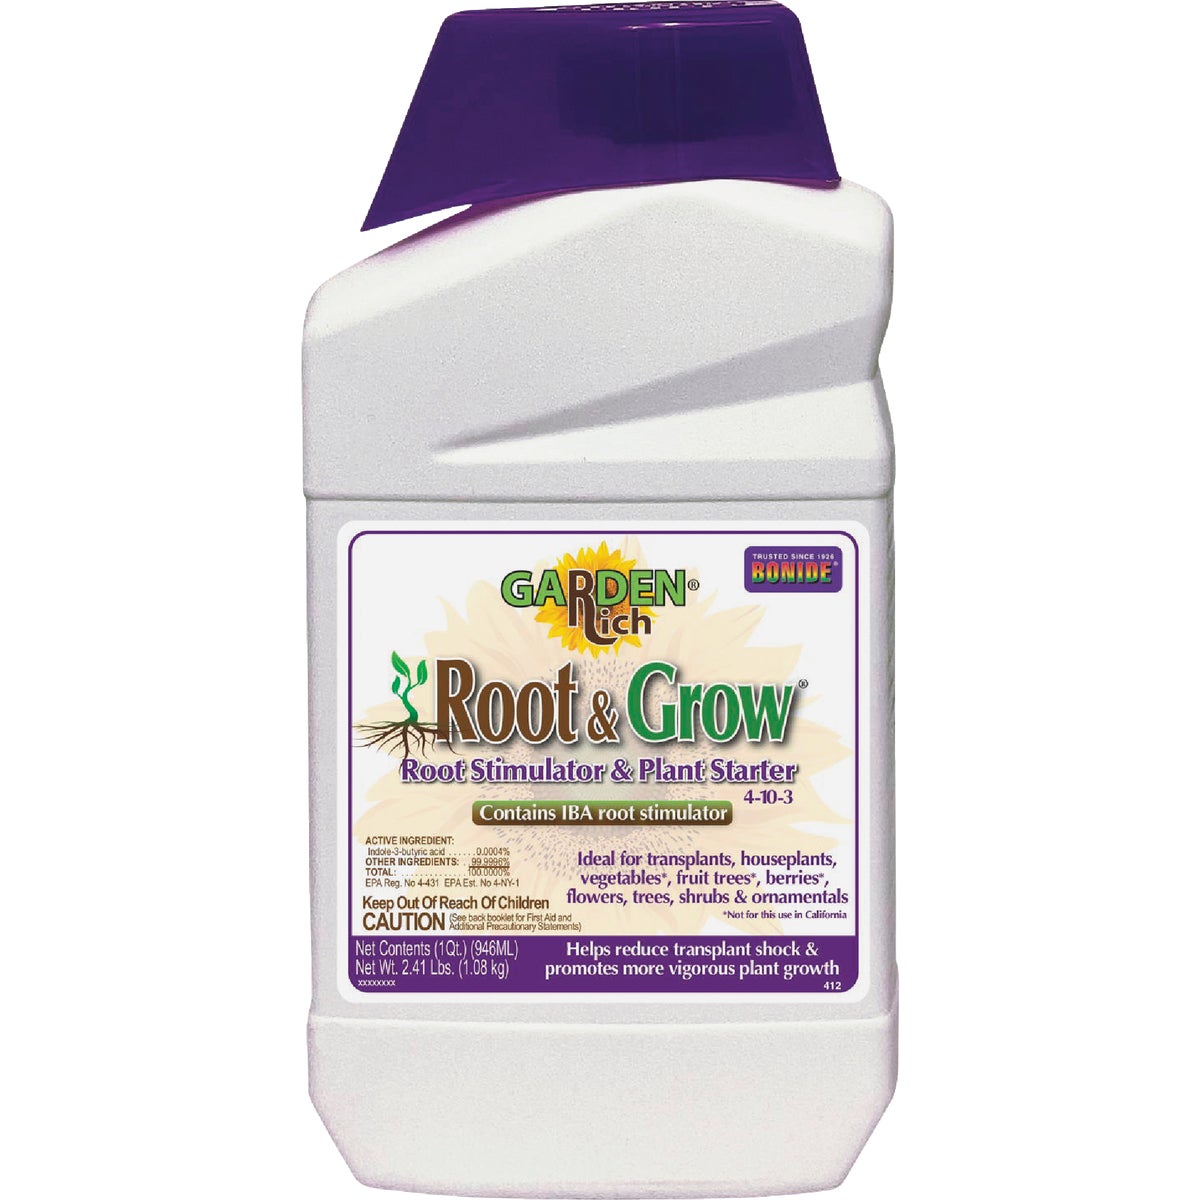 Item 714054, Stimulates early and strong root formation. Reduces transplant shock.